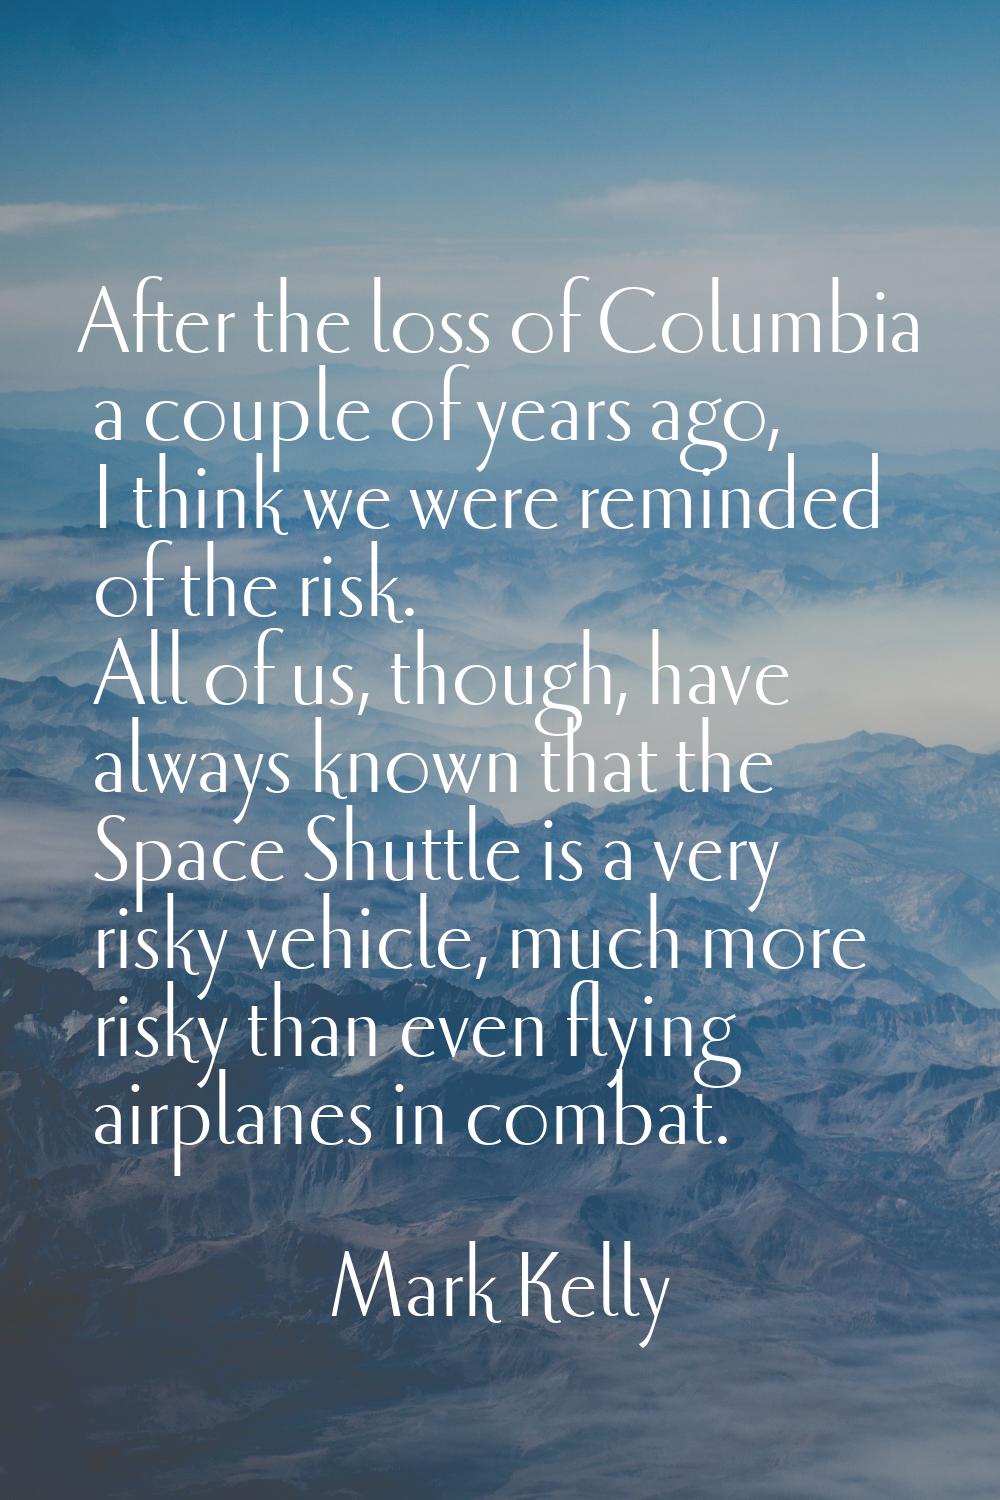 After the loss of Columbia a couple of years ago, I think we were reminded of the risk. All of us, 